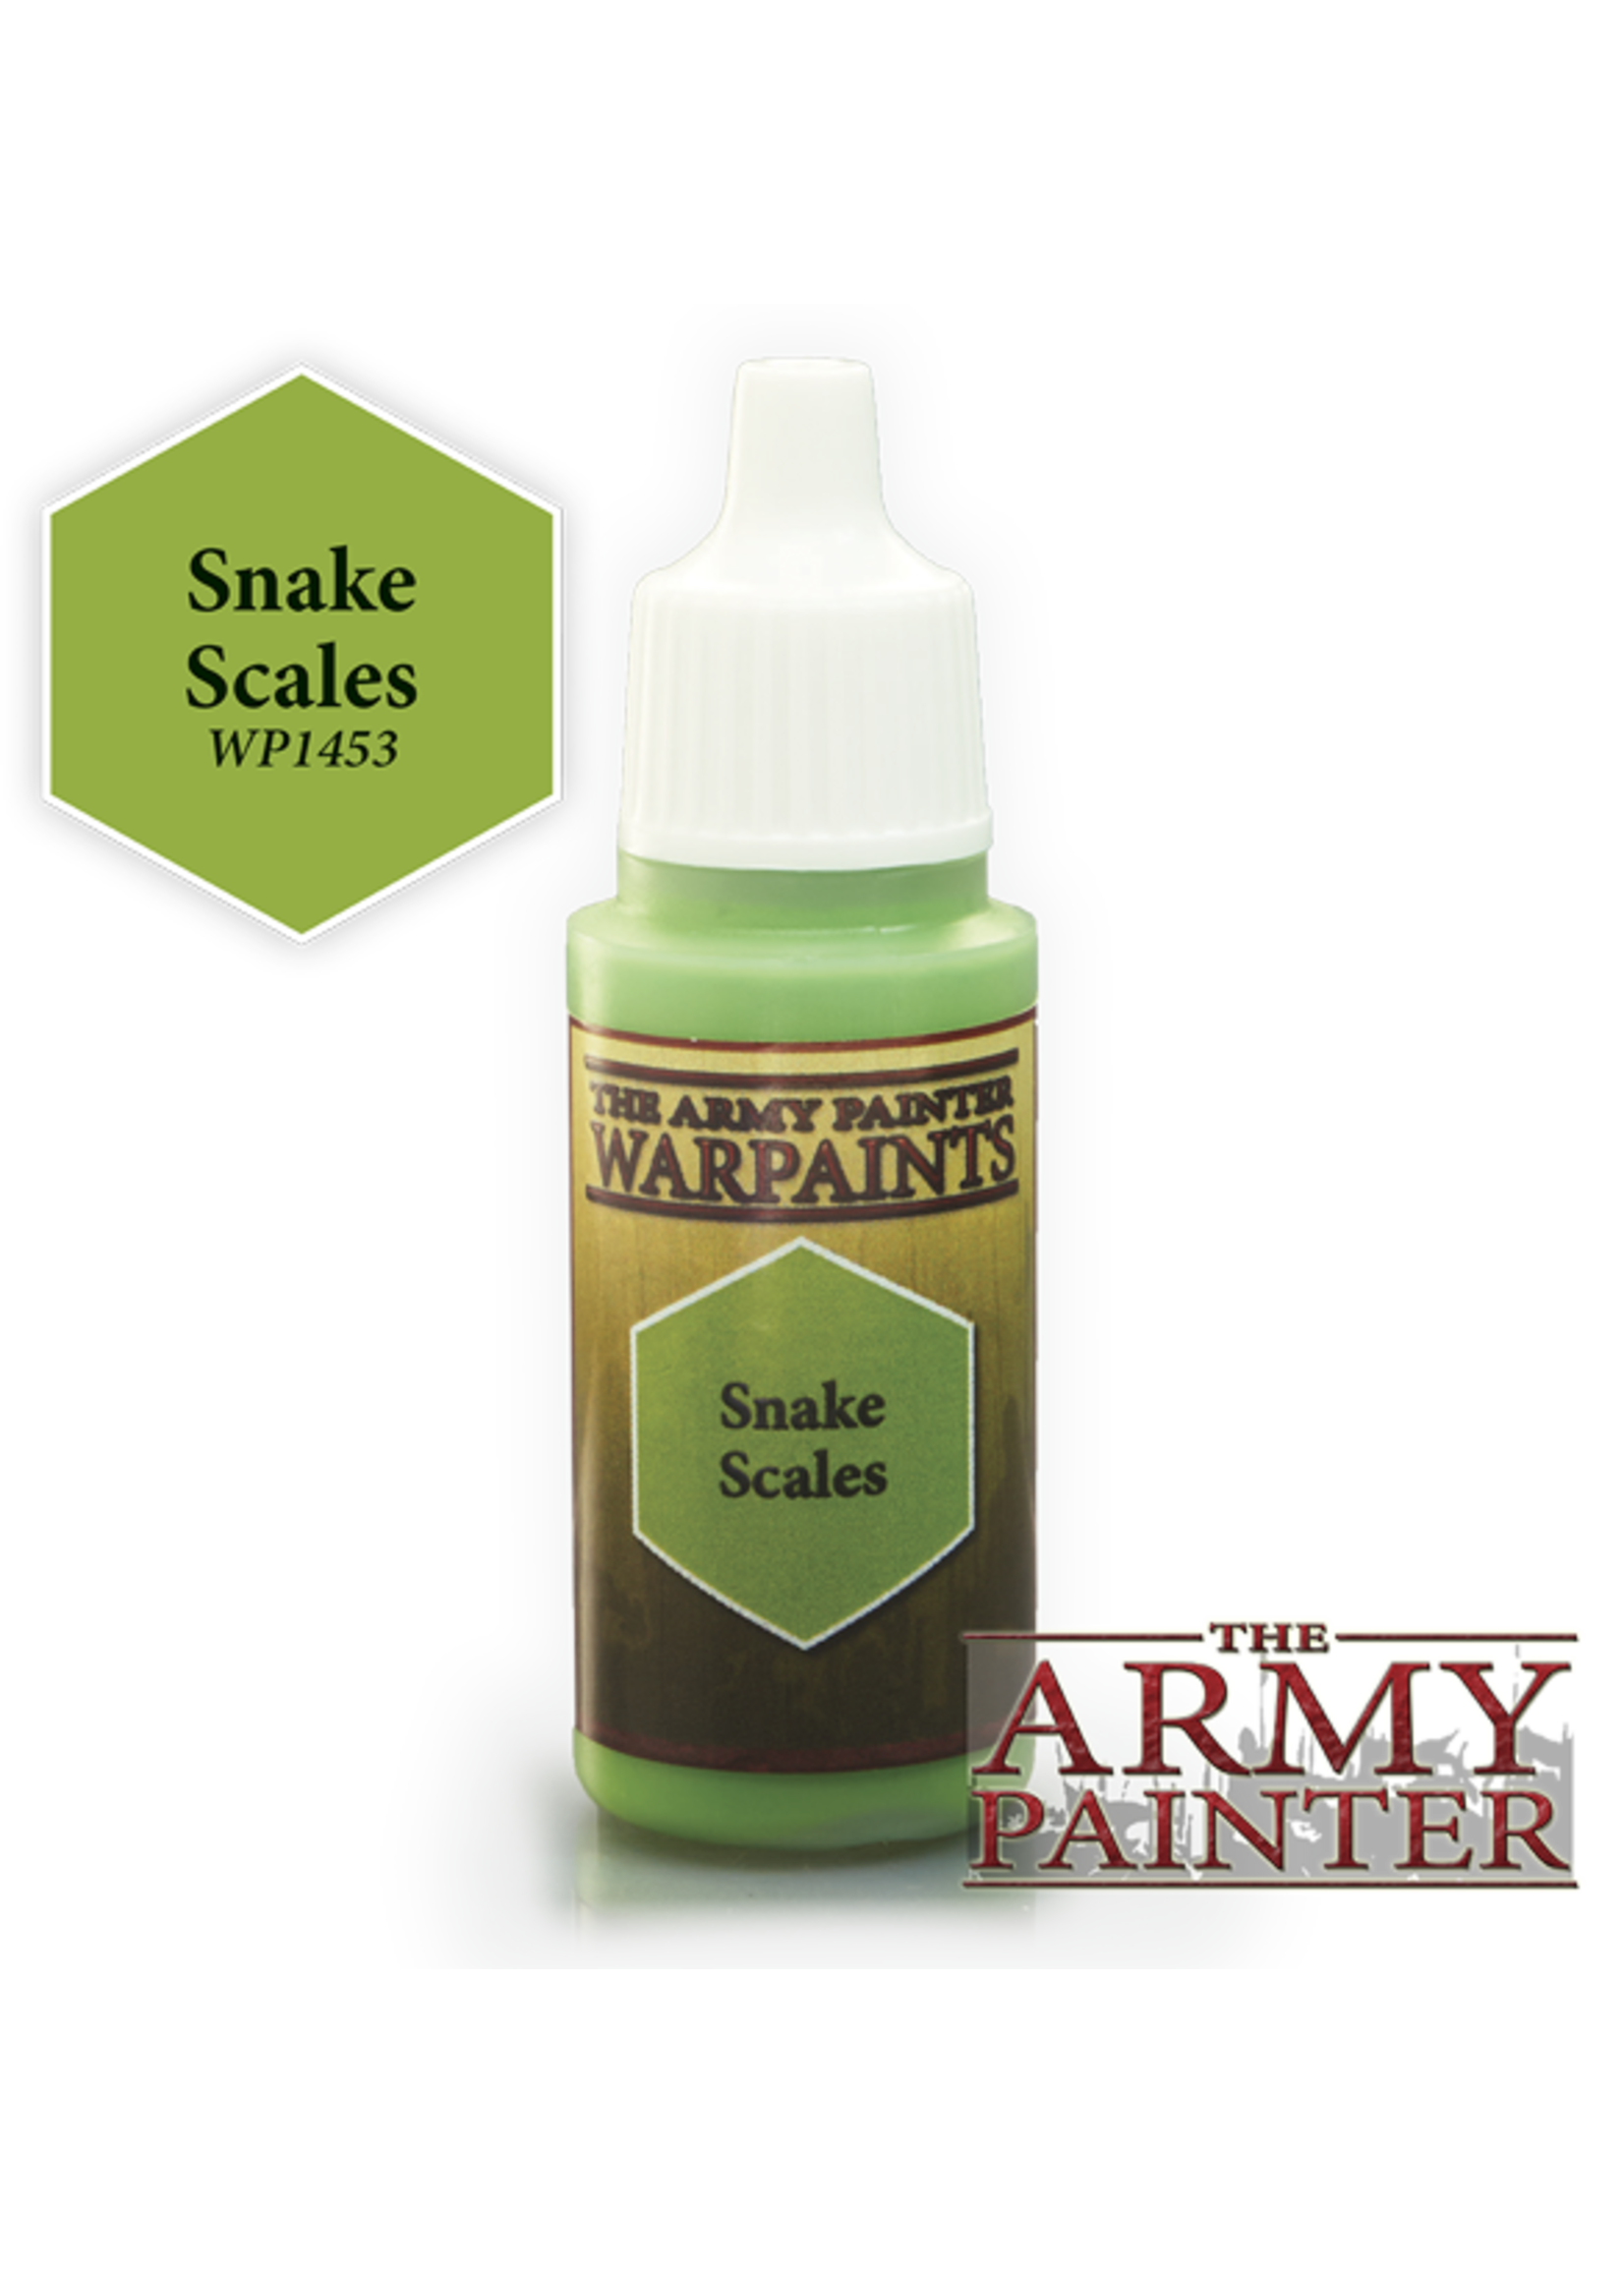 The Army Painter Acrylics Warpaints Snake Scales